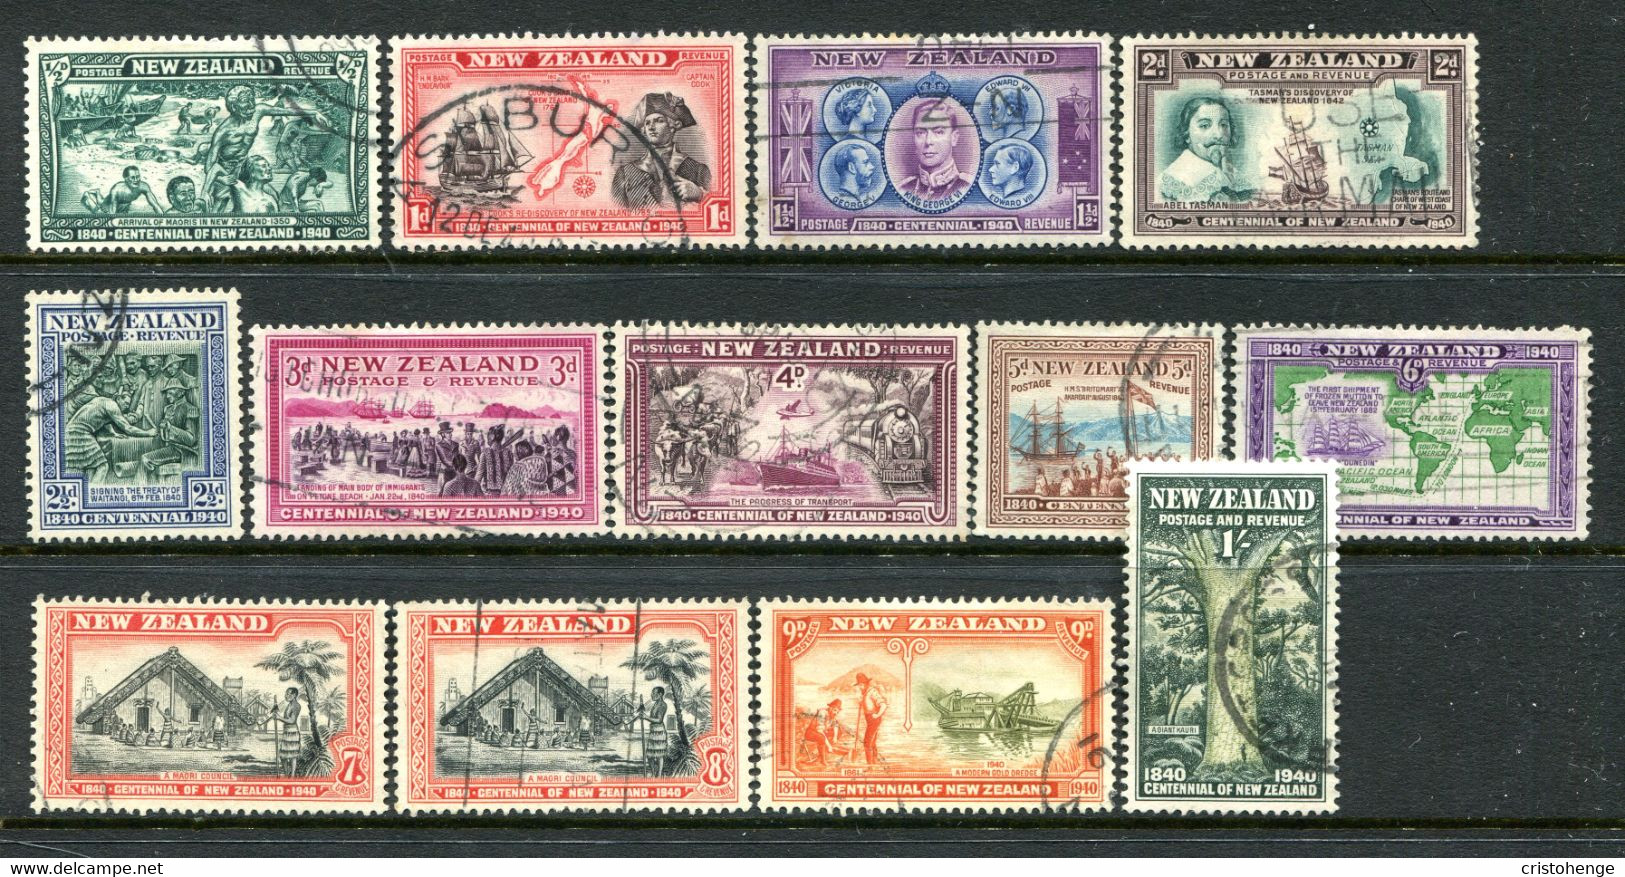 New Zealand 1940 Centenary Of Proclamation Of British Sovereignty Set Used (SG 613-625) - Used Stamps